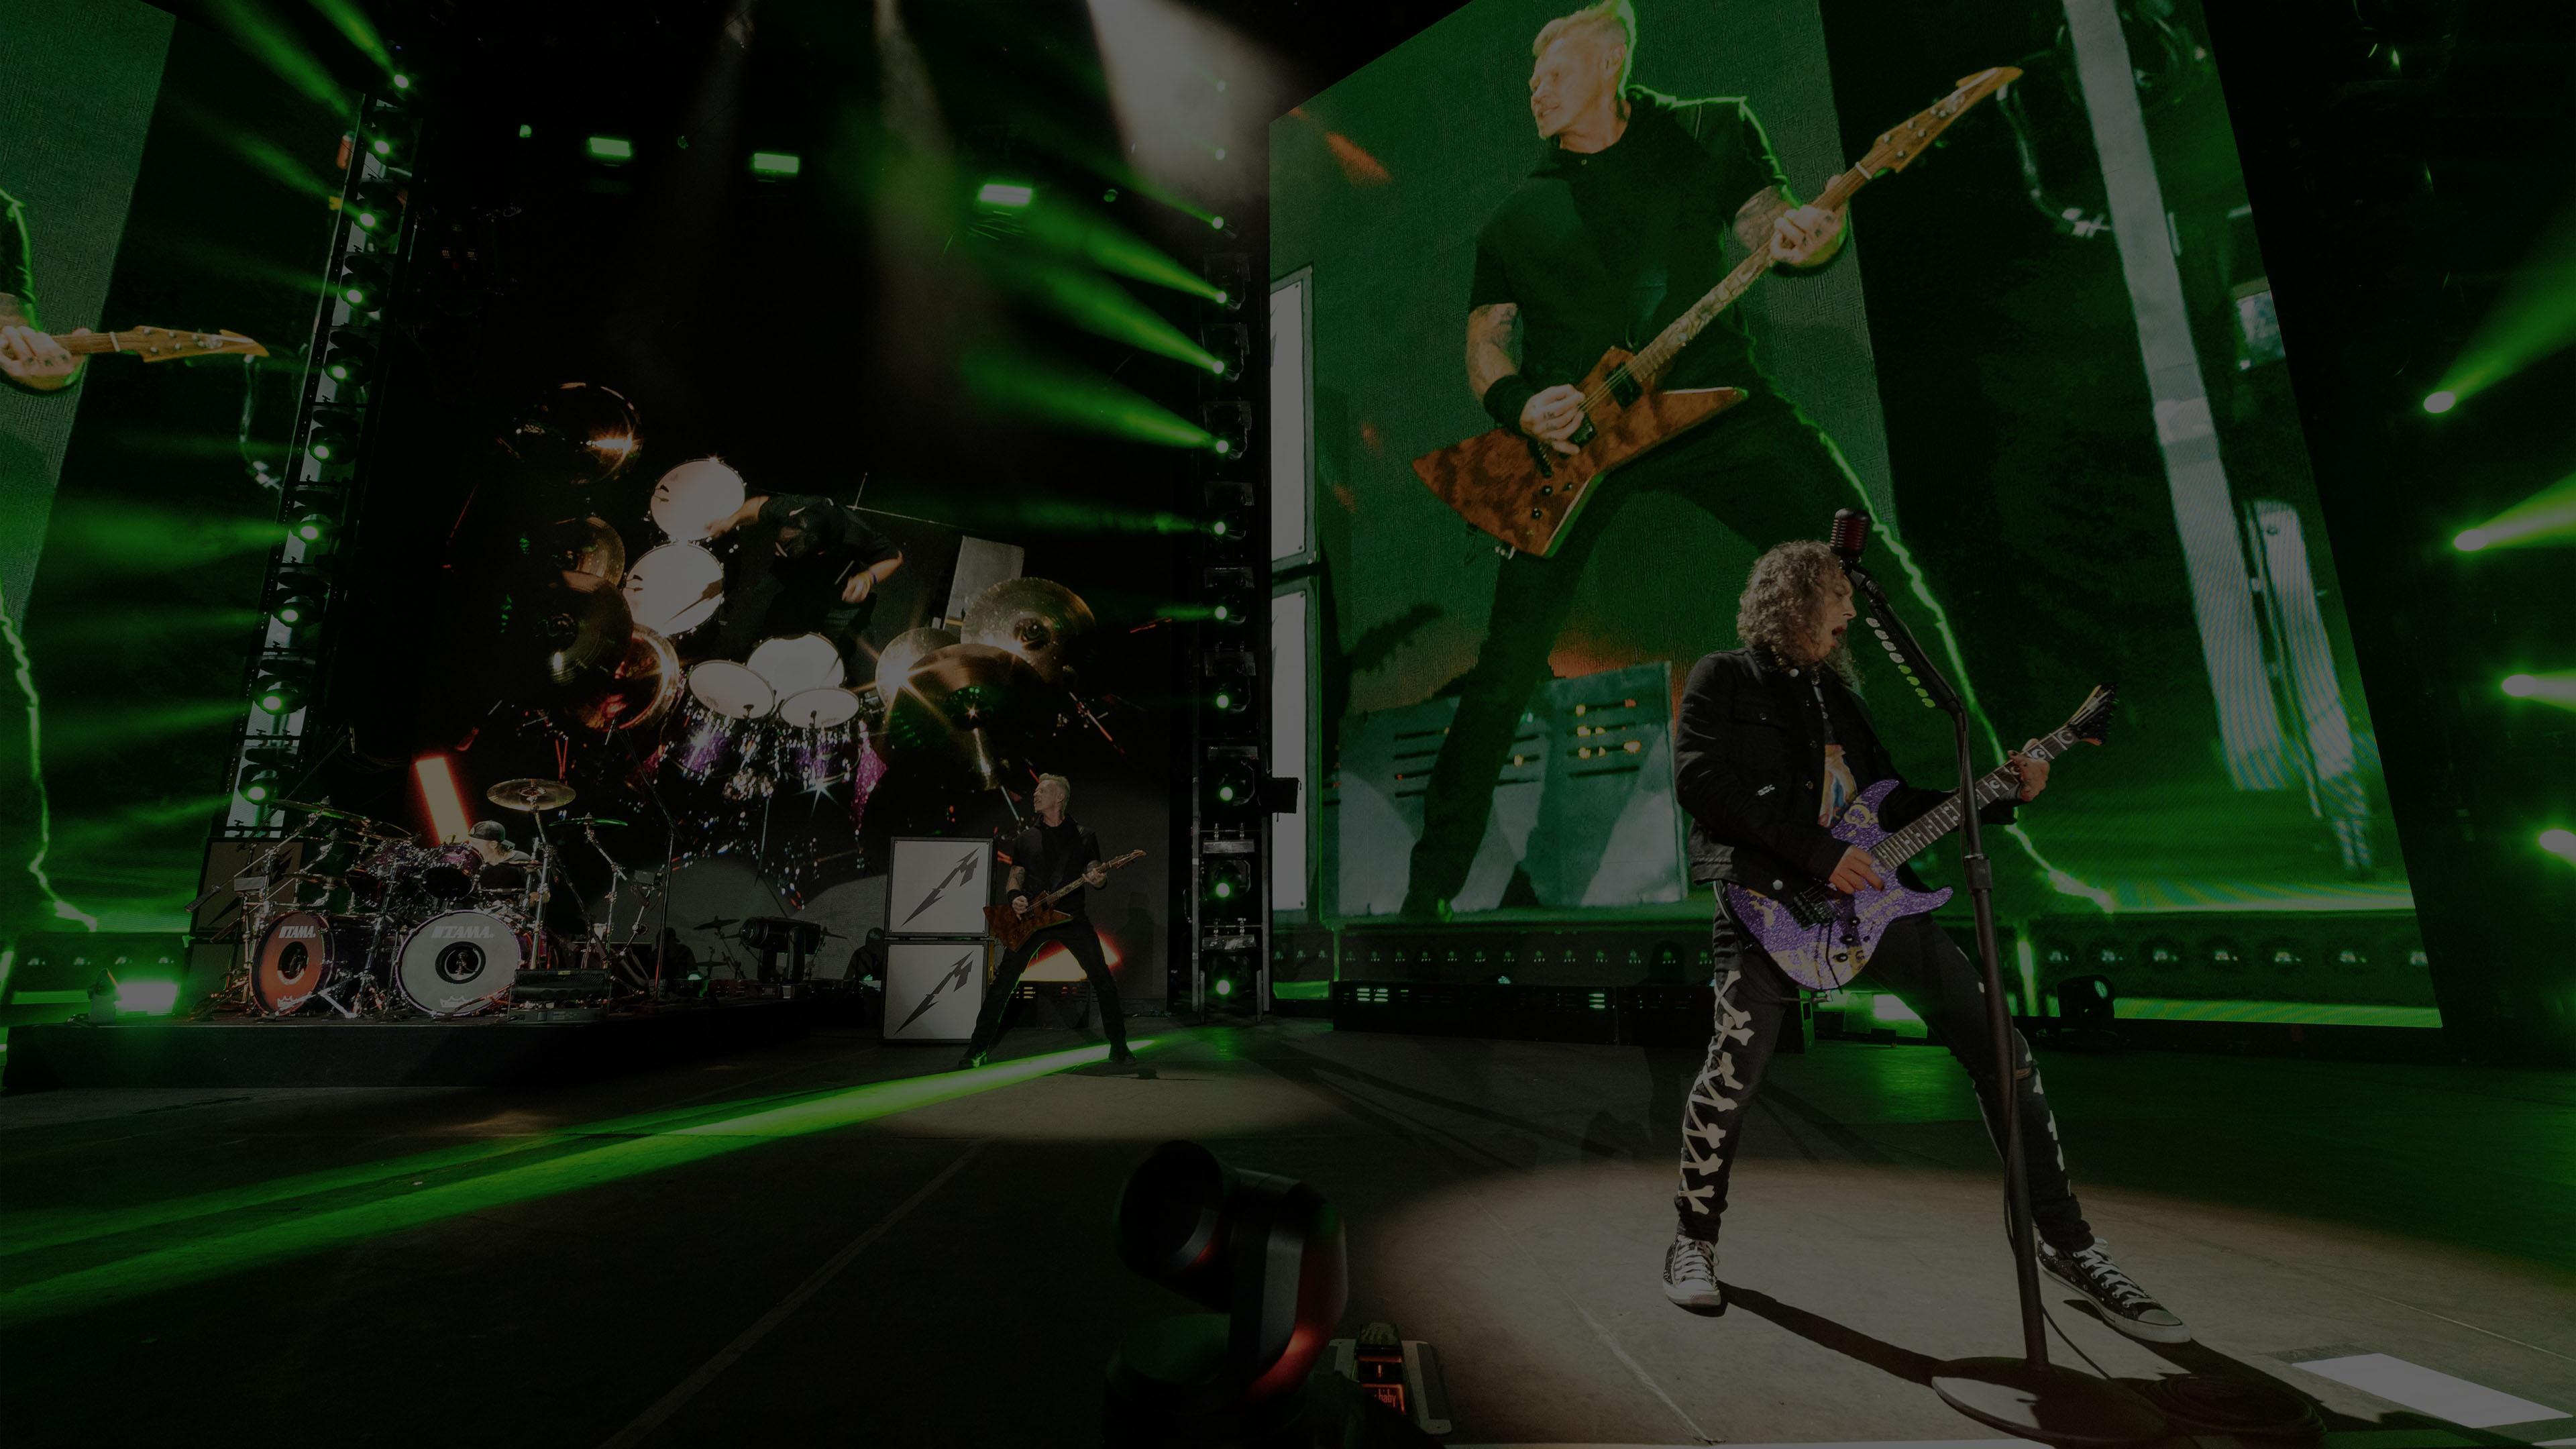 Banner Image for the photo gallery from the gig in Buenos Aires, Argentina shot on April 30, 2022